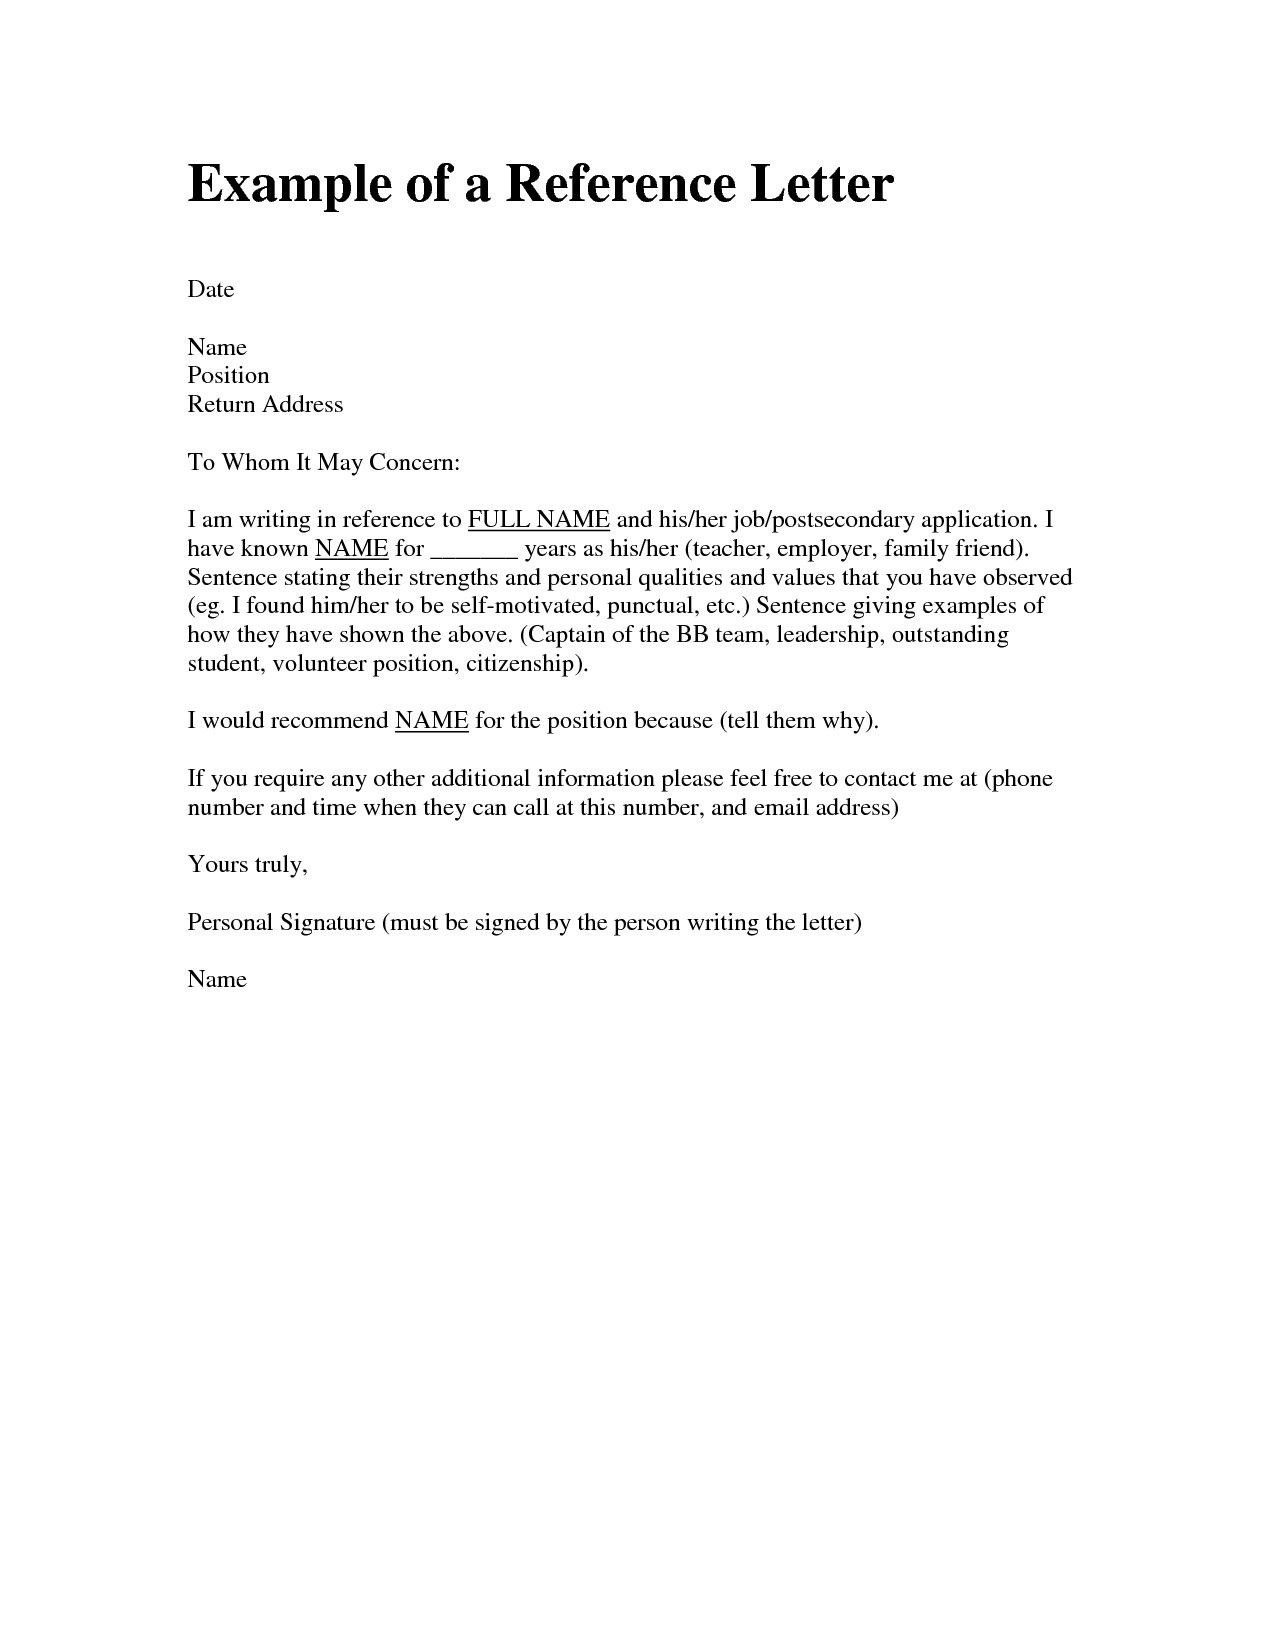 Sample Request Letter For Certificate Of Good Standing  Manswikstromse within Request Letter For Internet Connection Template